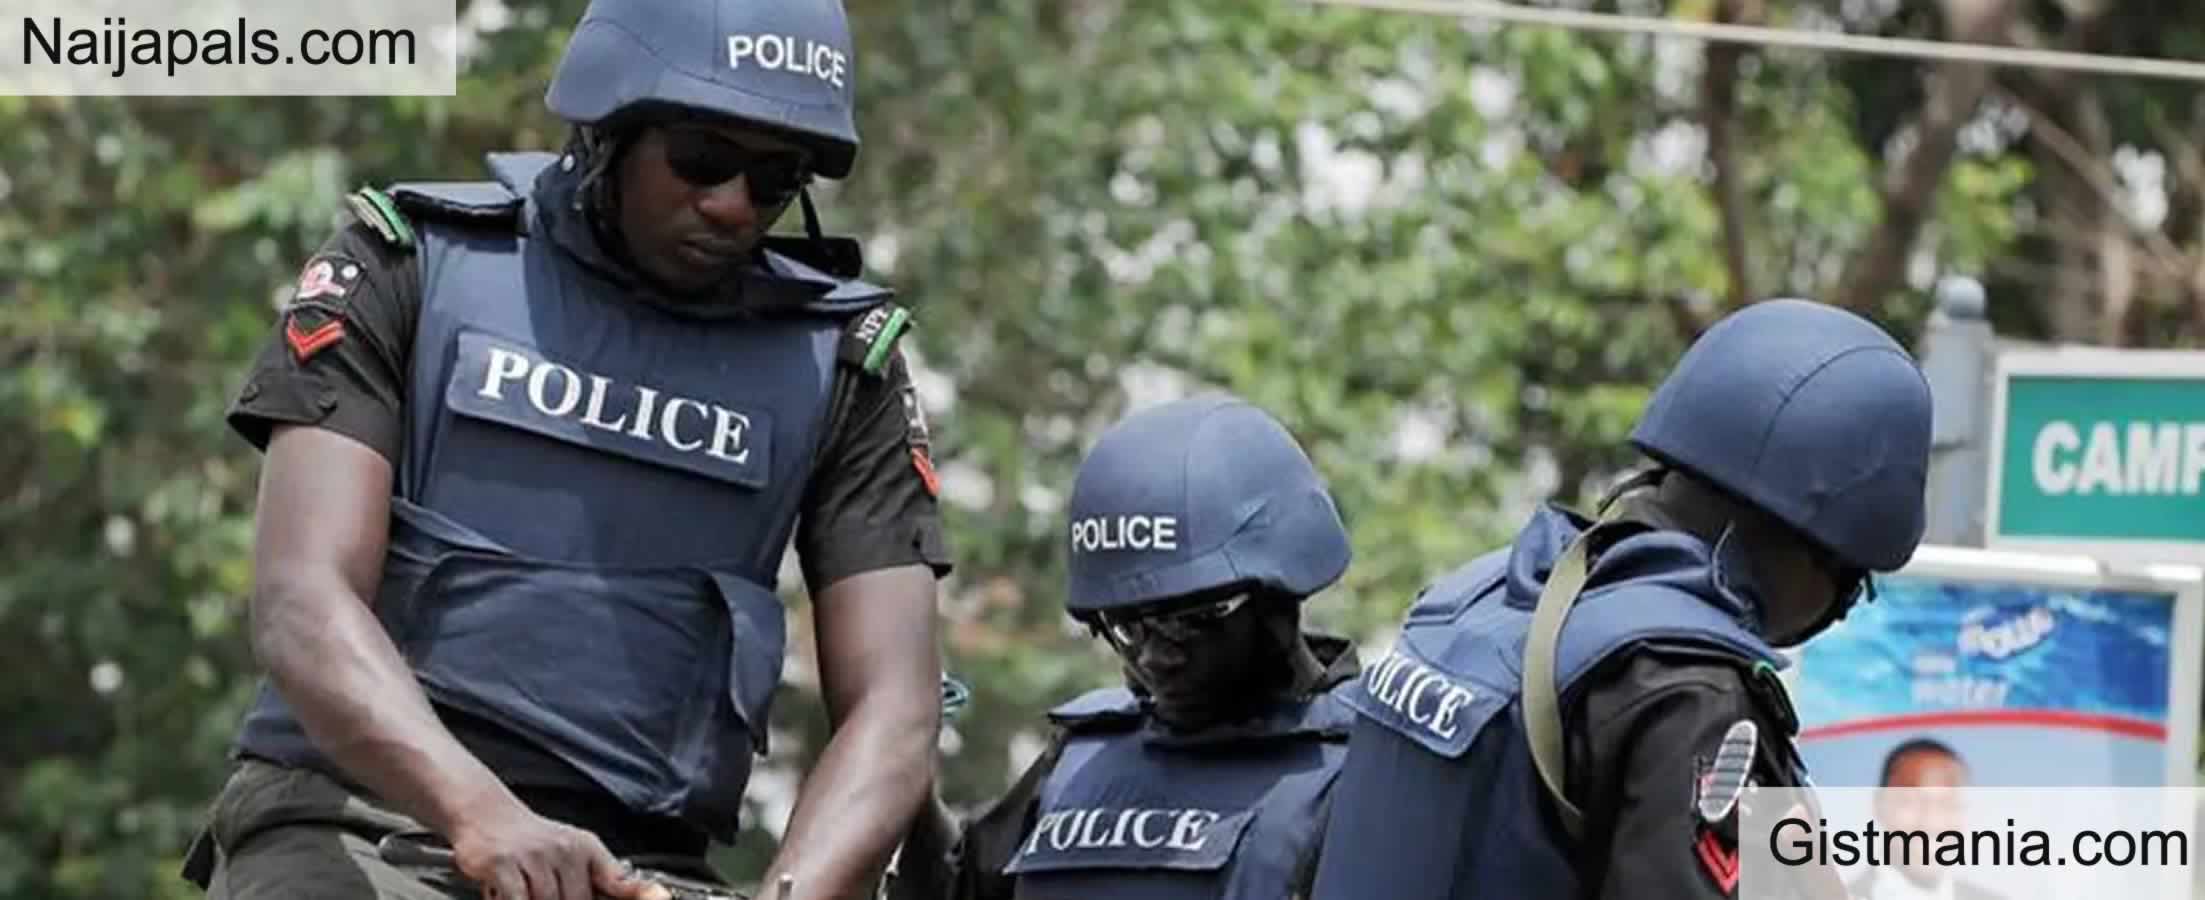 Drama Looms As Accountant Accuses Ex-Employer, Police Of Harassment In Lagos